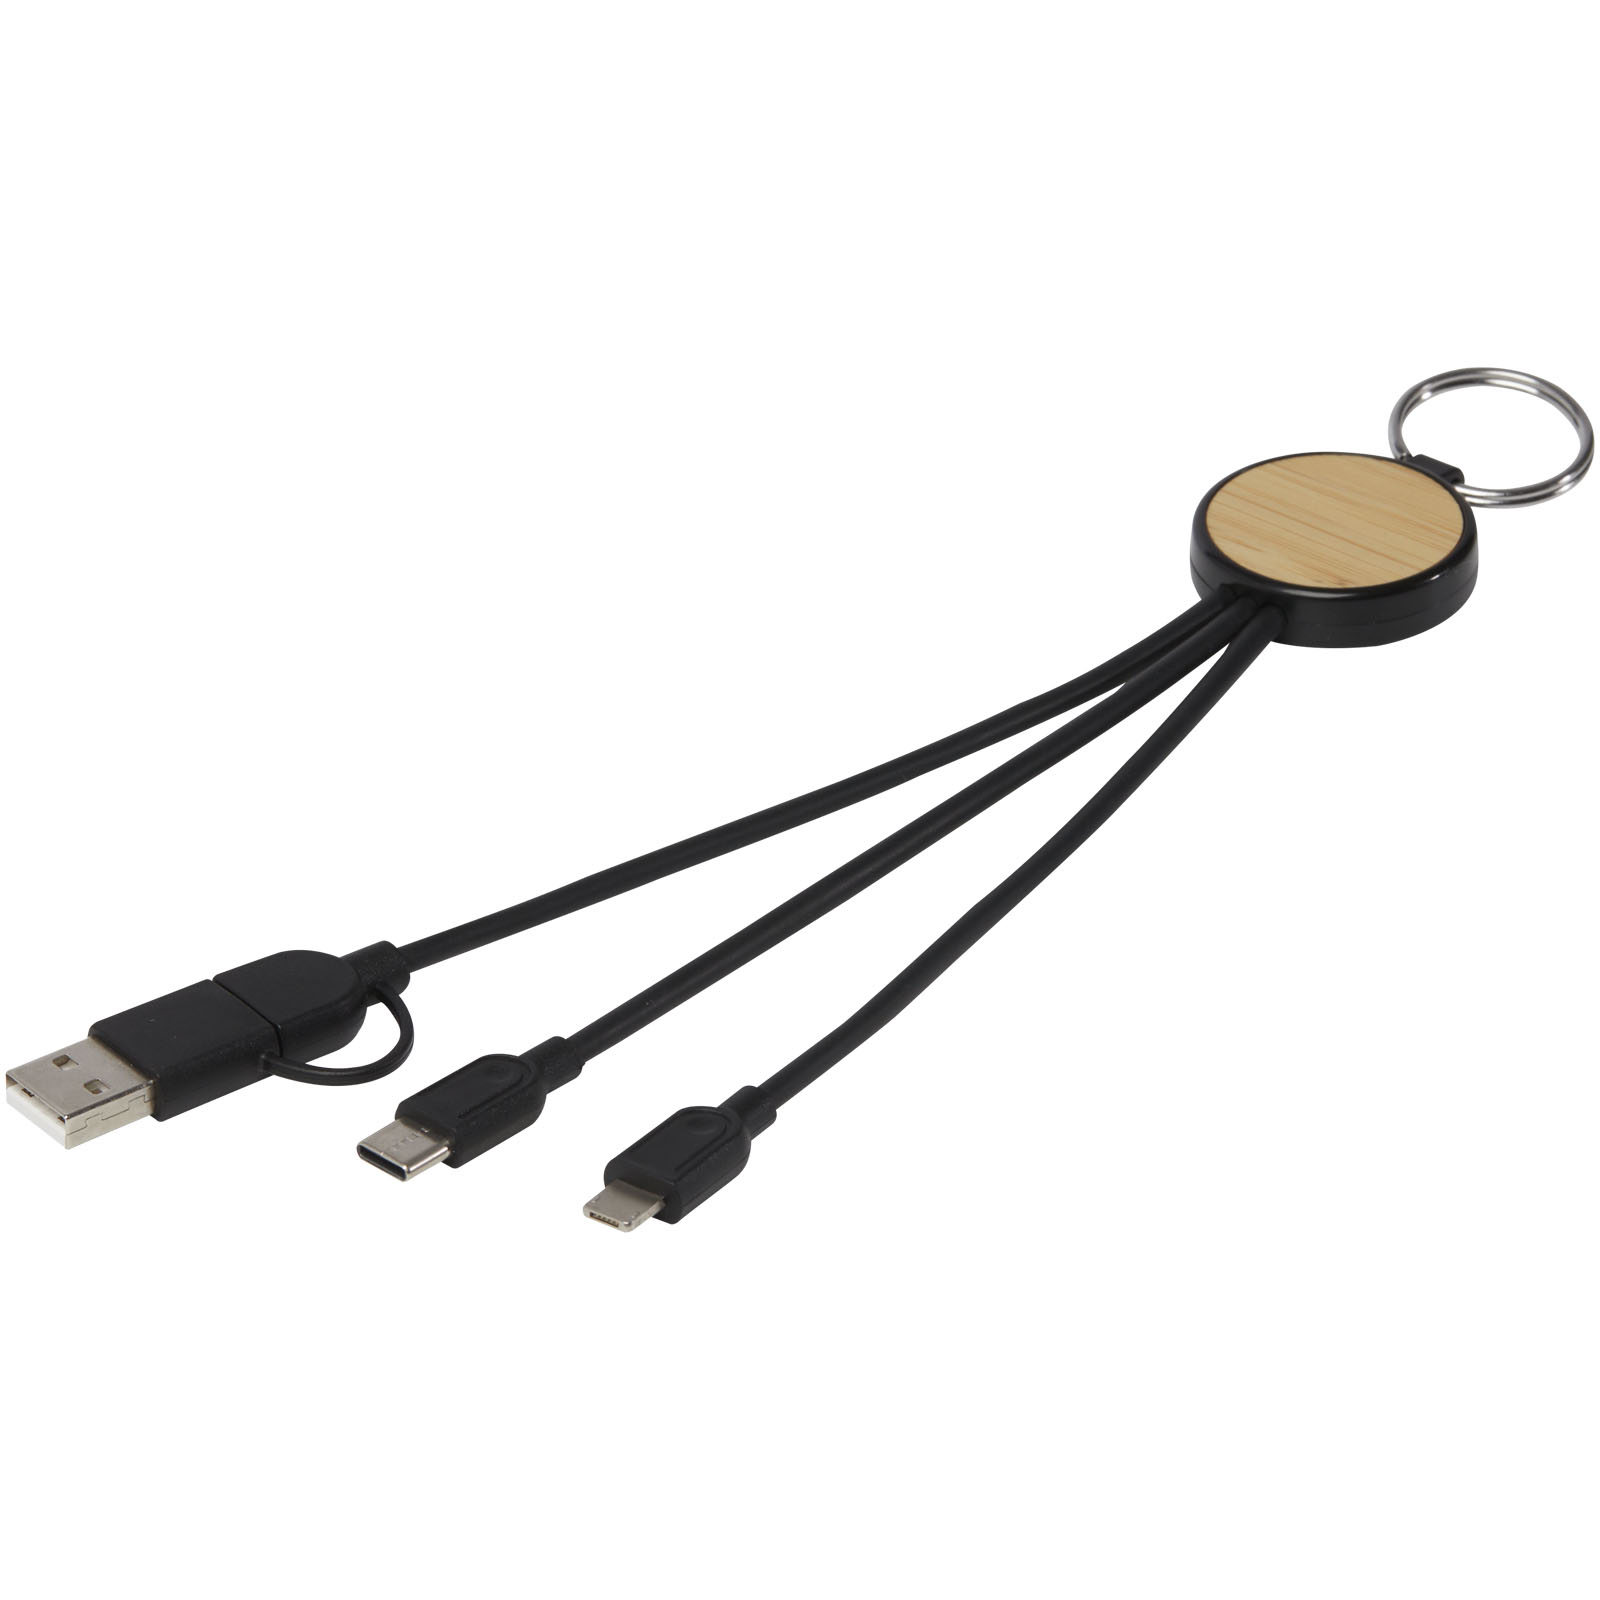 Advertising Cables - Tecta 6-in-1 recycled plastic/bamboo charging cable with keyring